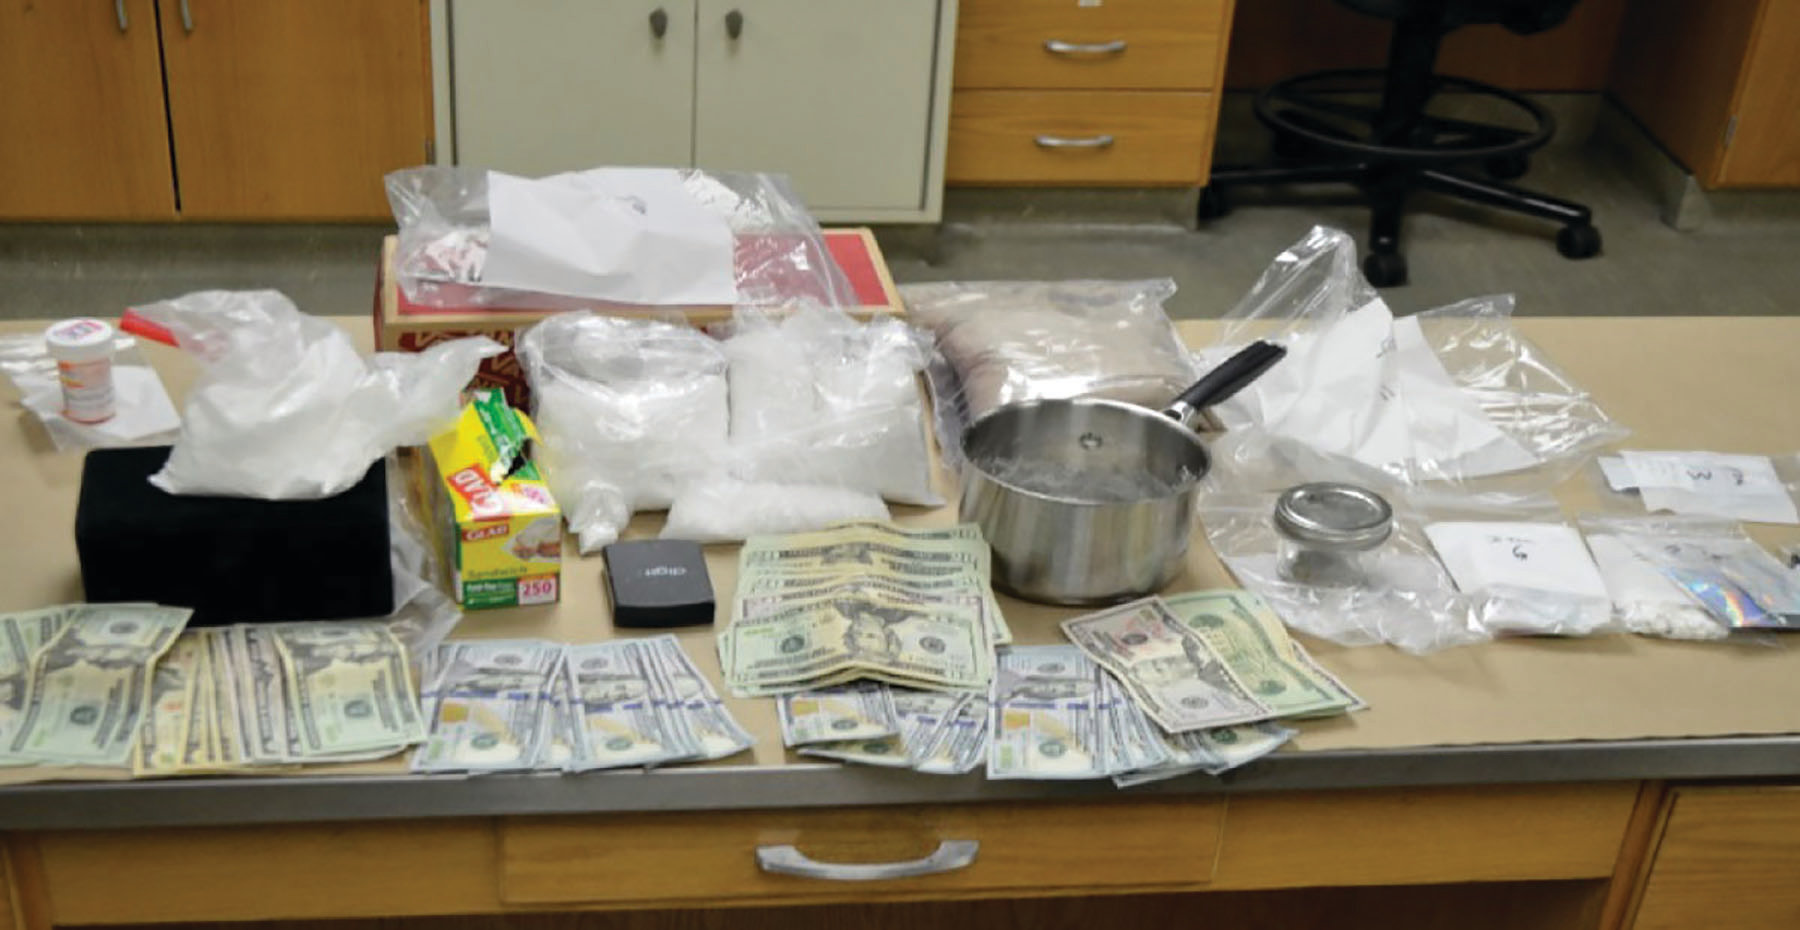 PHOTO PROVIDEDWhen executing the search warrant at Calvin's home, agents seized approximately one kilogram of methamphetamine, approximately 200 grams of cocaine, a small amount of marijuana, other controlled substances and $3,908 in cash.